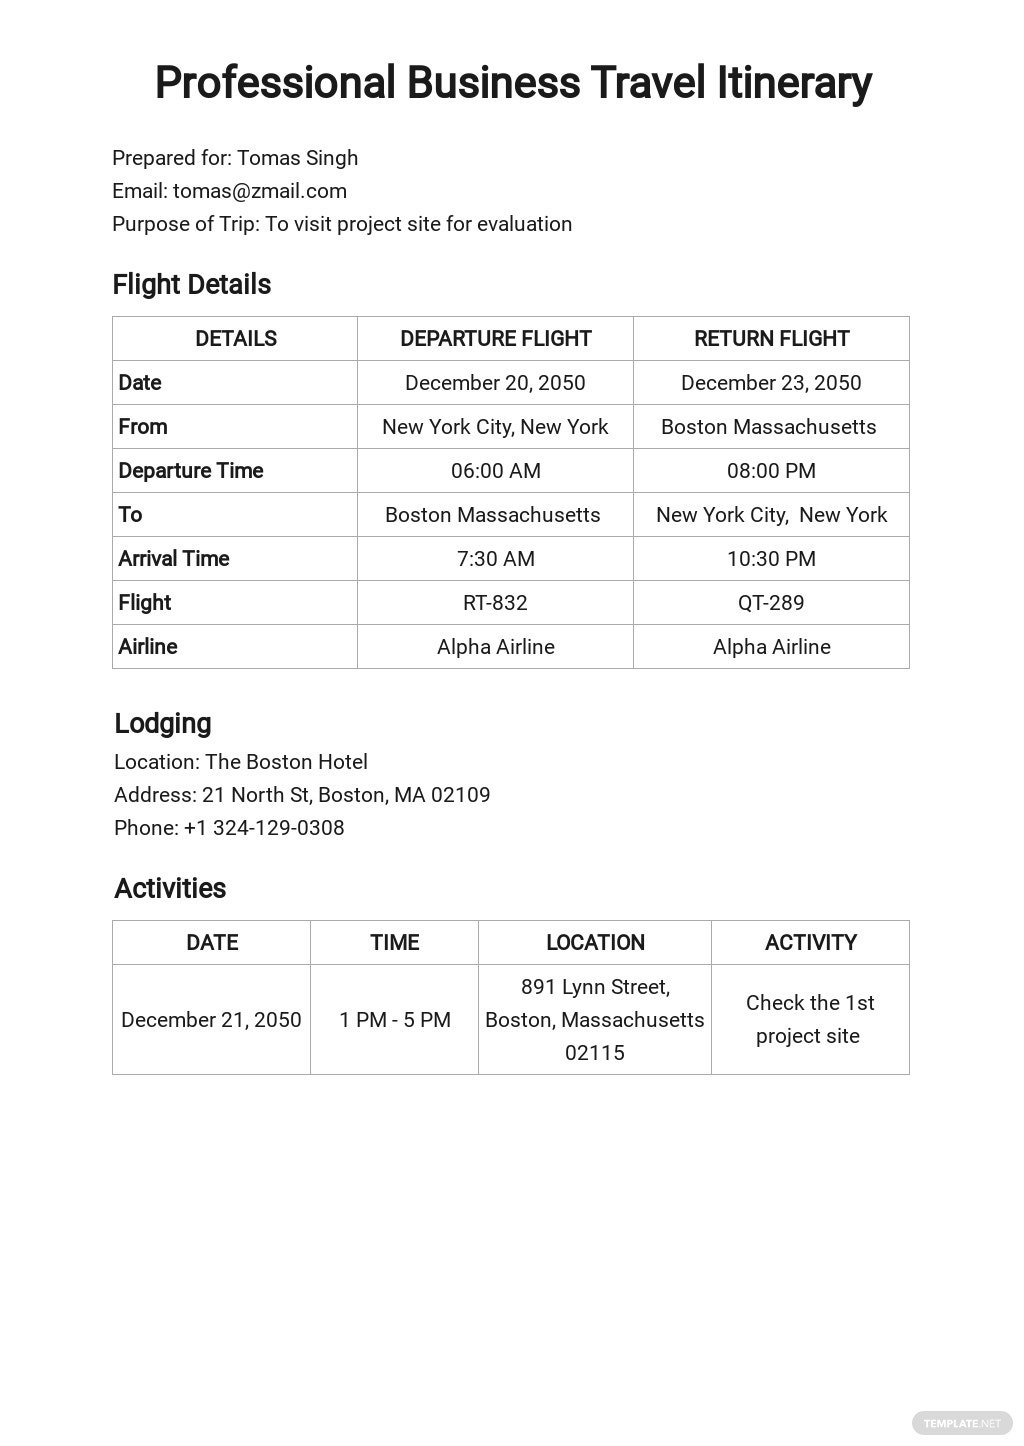 free-professional-business-travel-itinerary-template